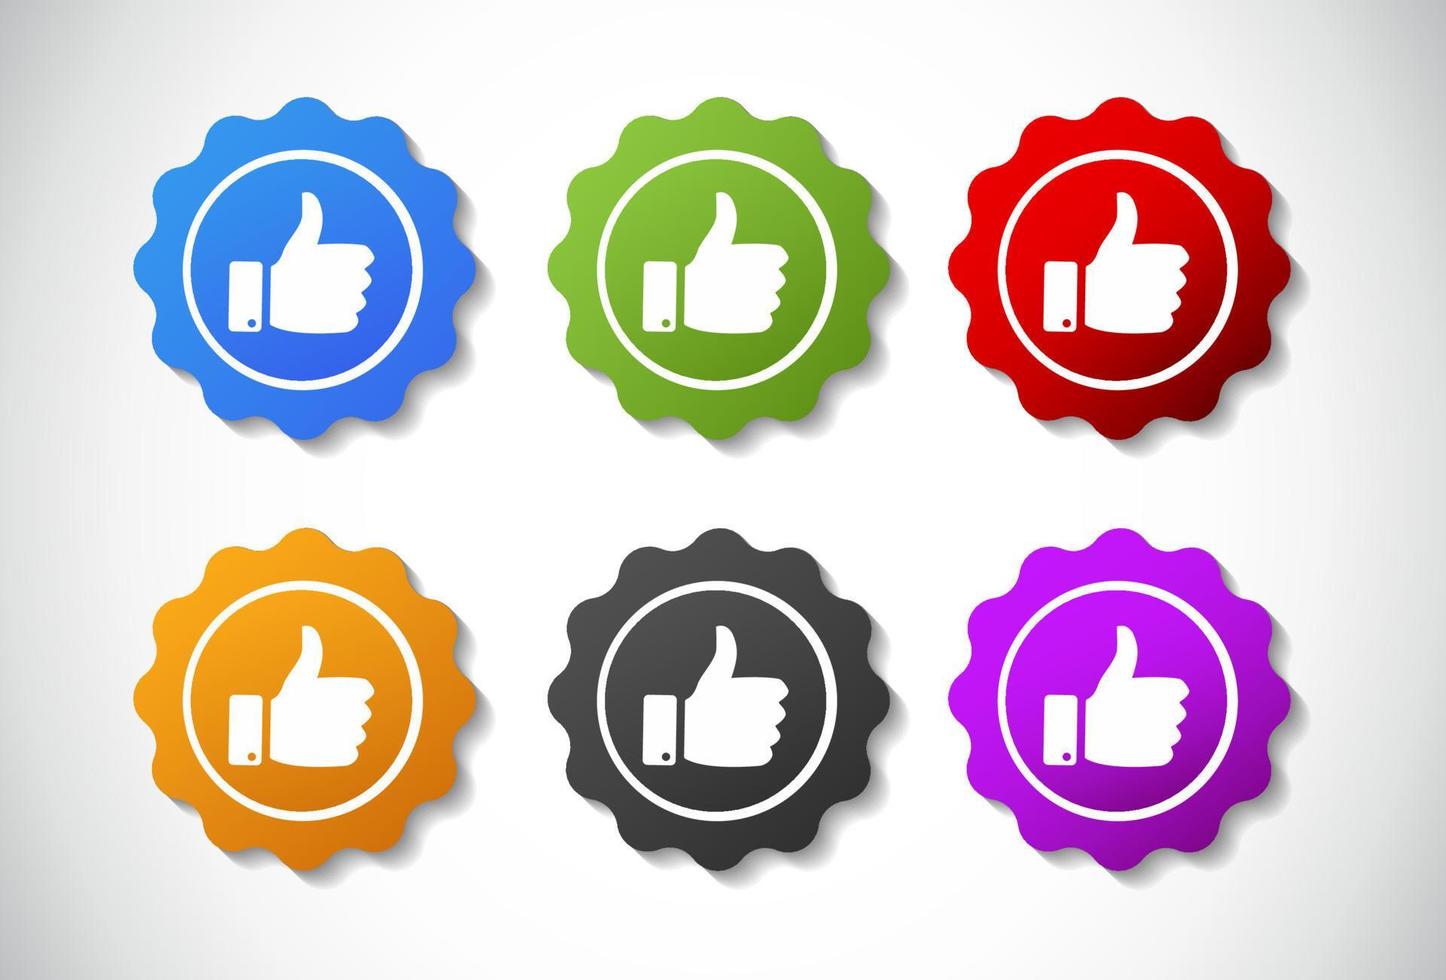 Approved medal collection or icon Recommend with thumbs up with a diverse color concept vector